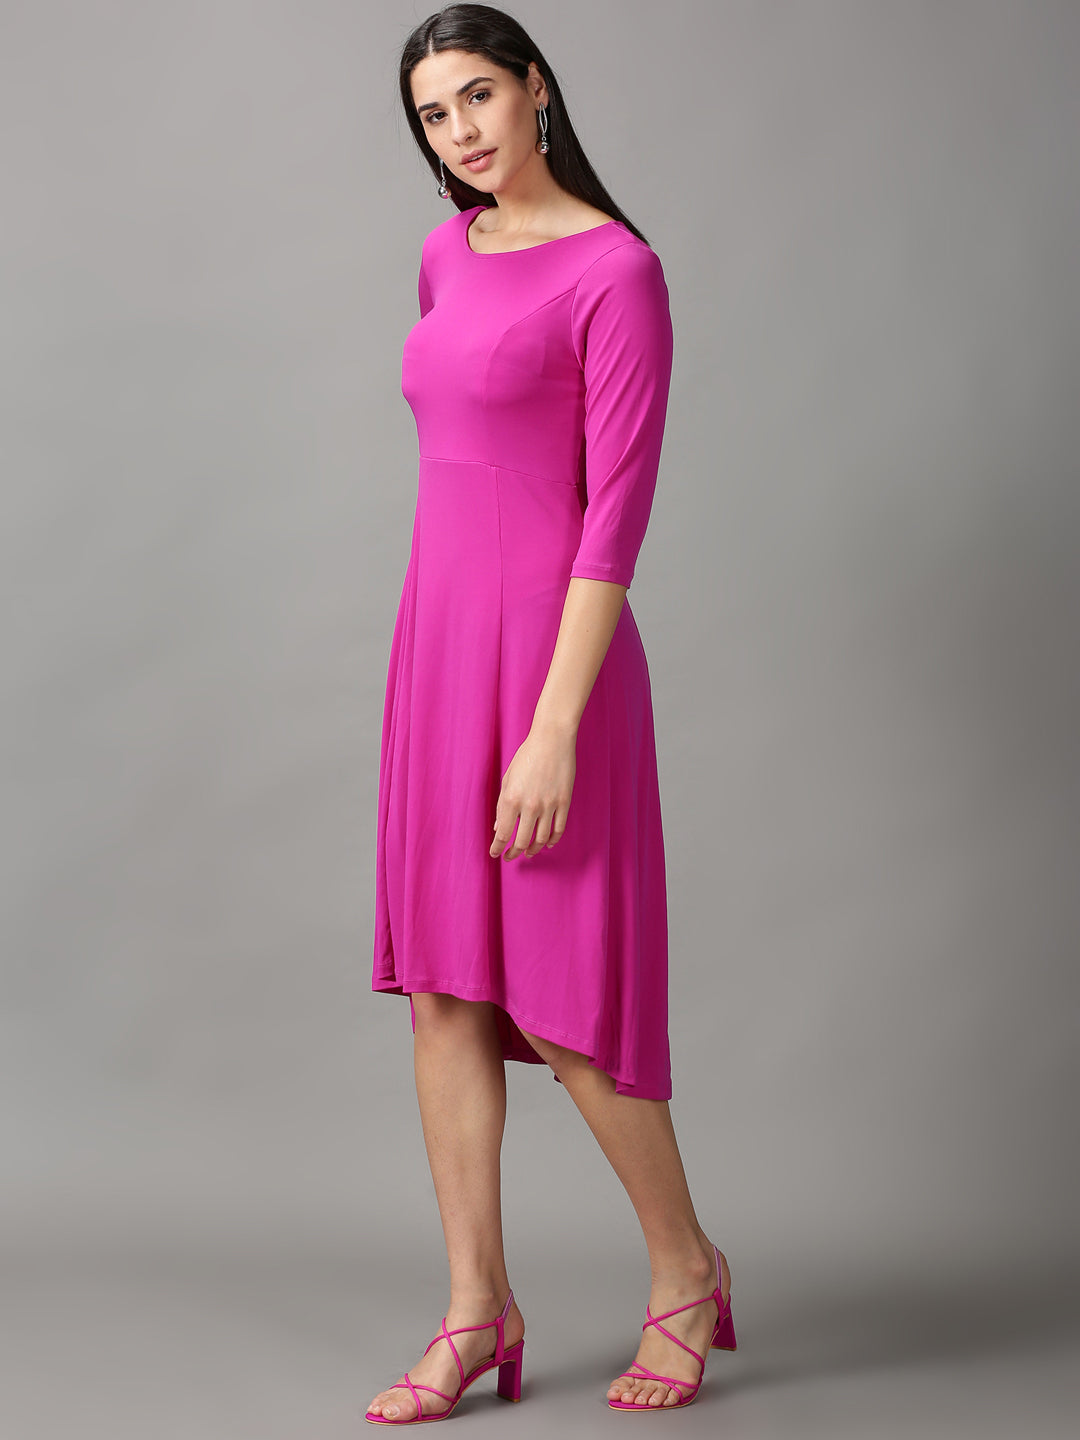 Women's Purple Solid Fit and Flare Dress